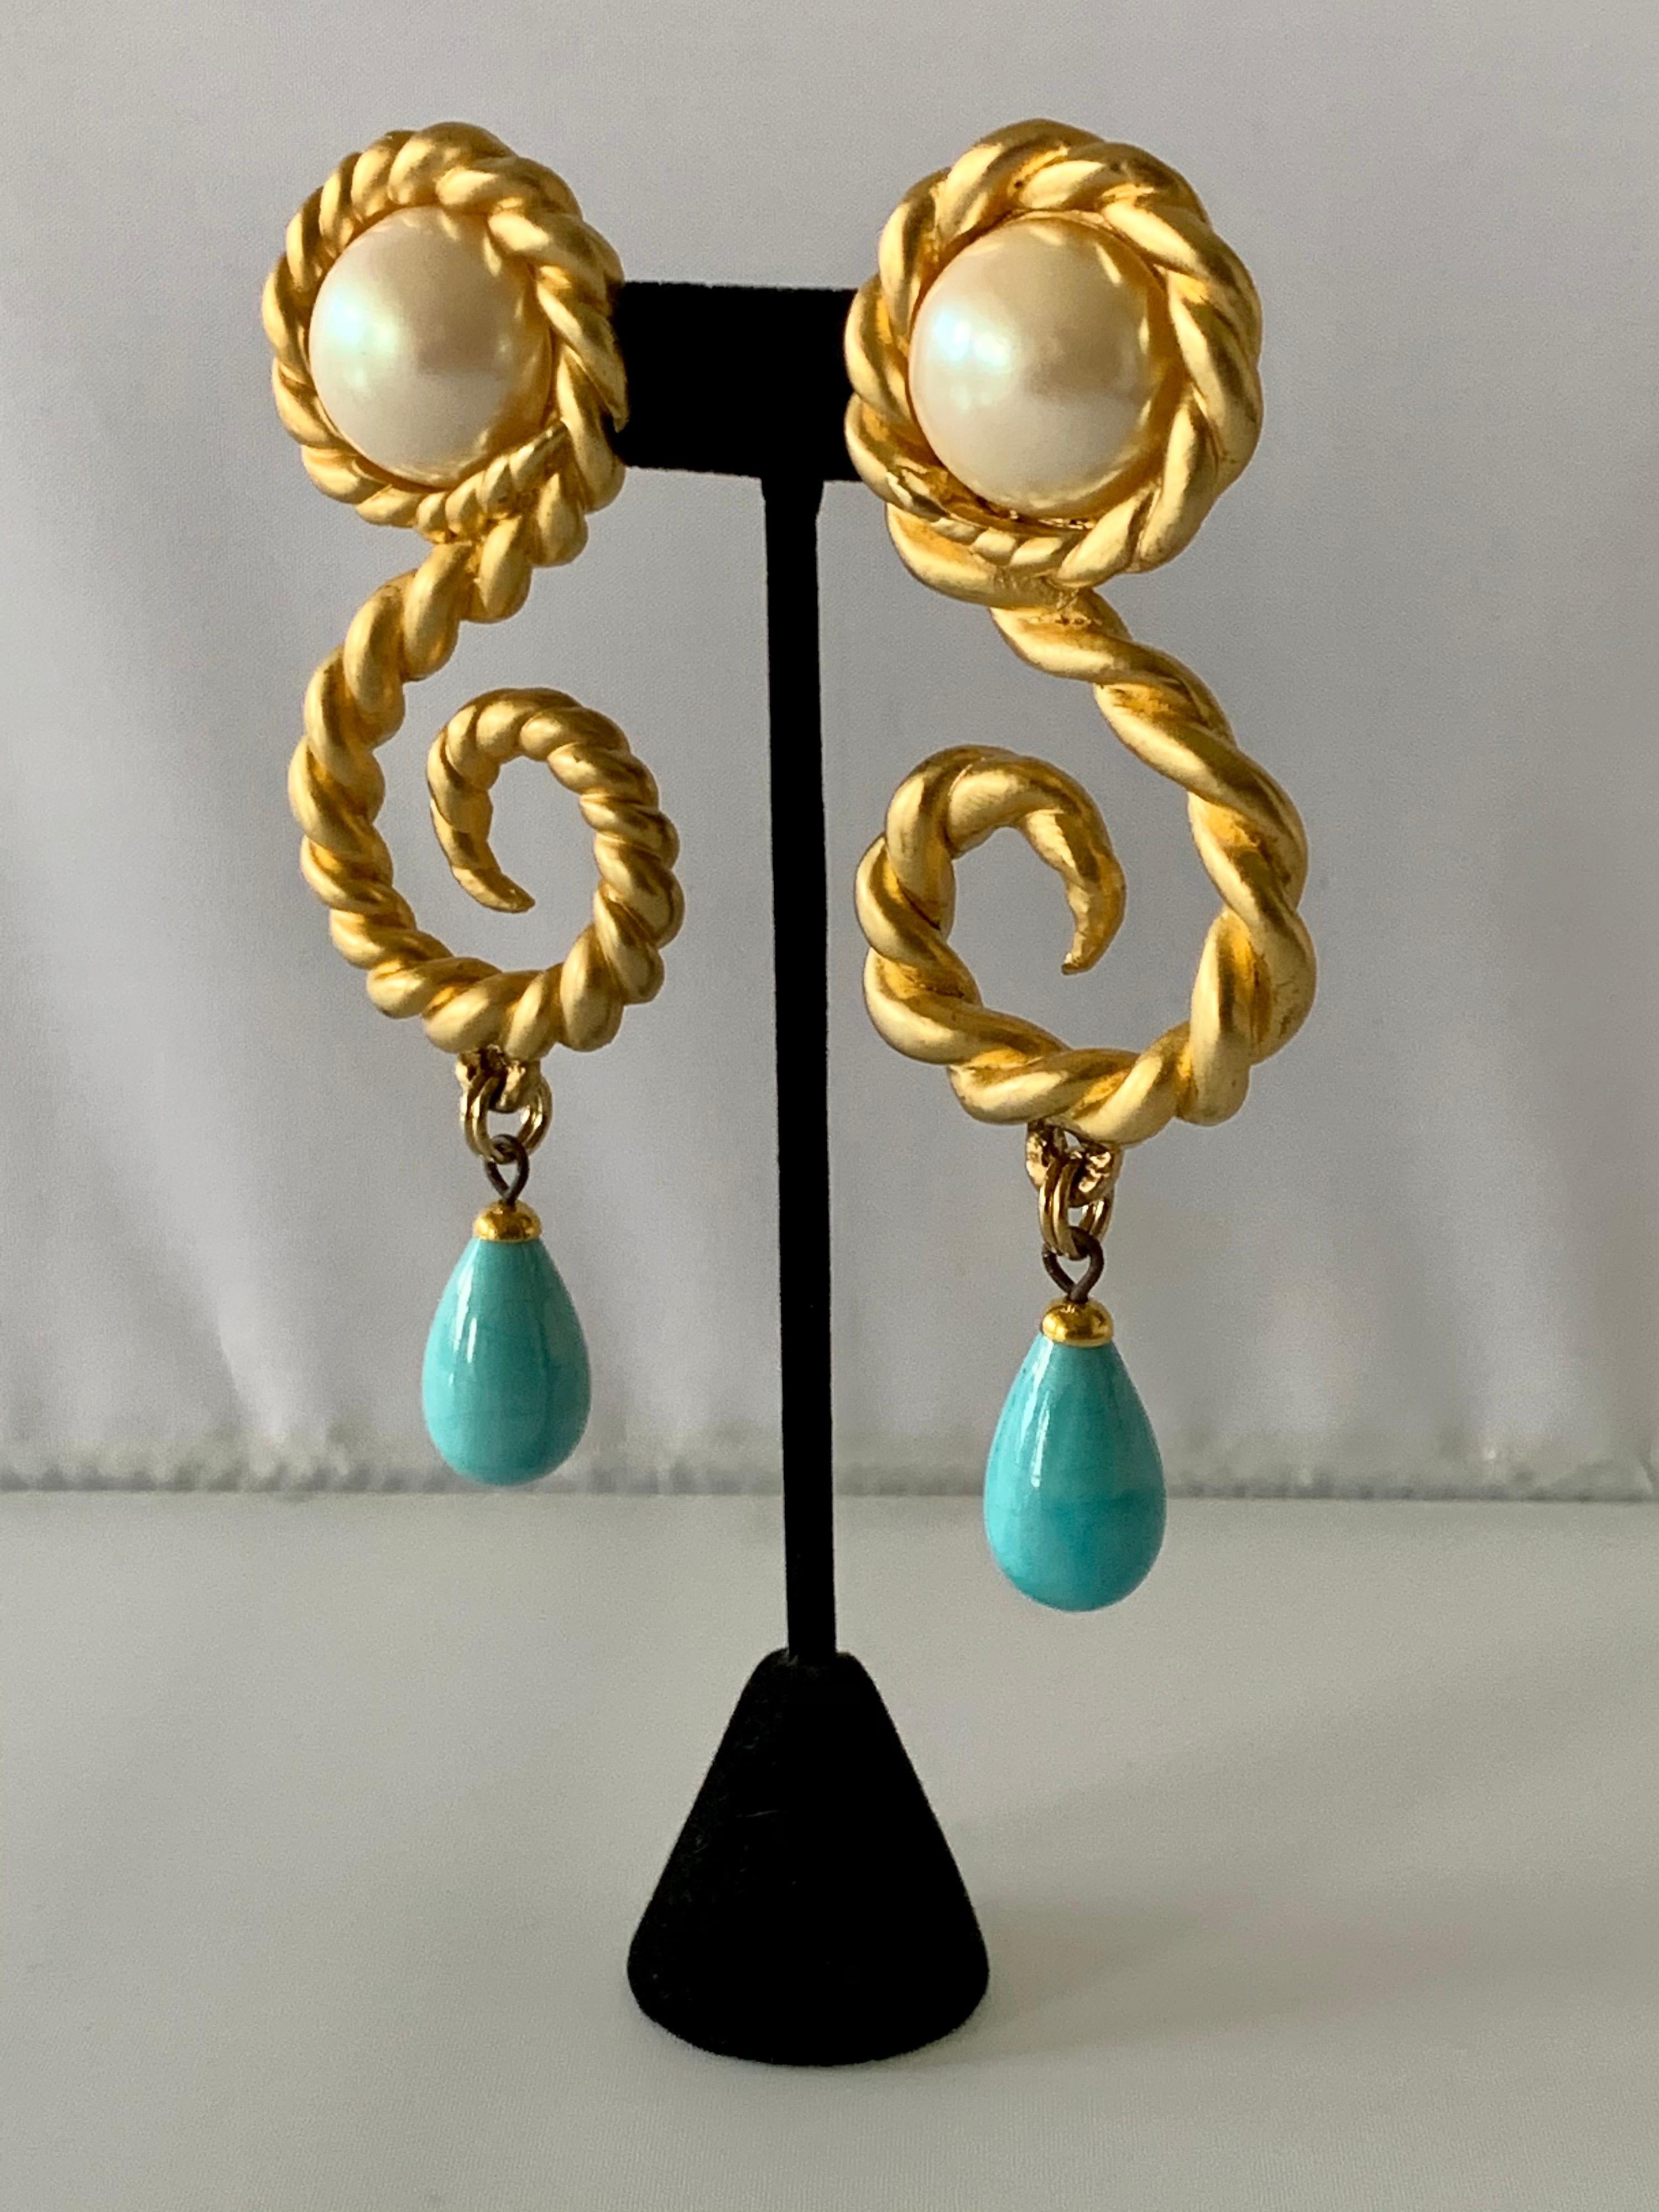 Bead Vintage Chanel  Gold Swirl Pearl and Turquoise Statement Earrings 